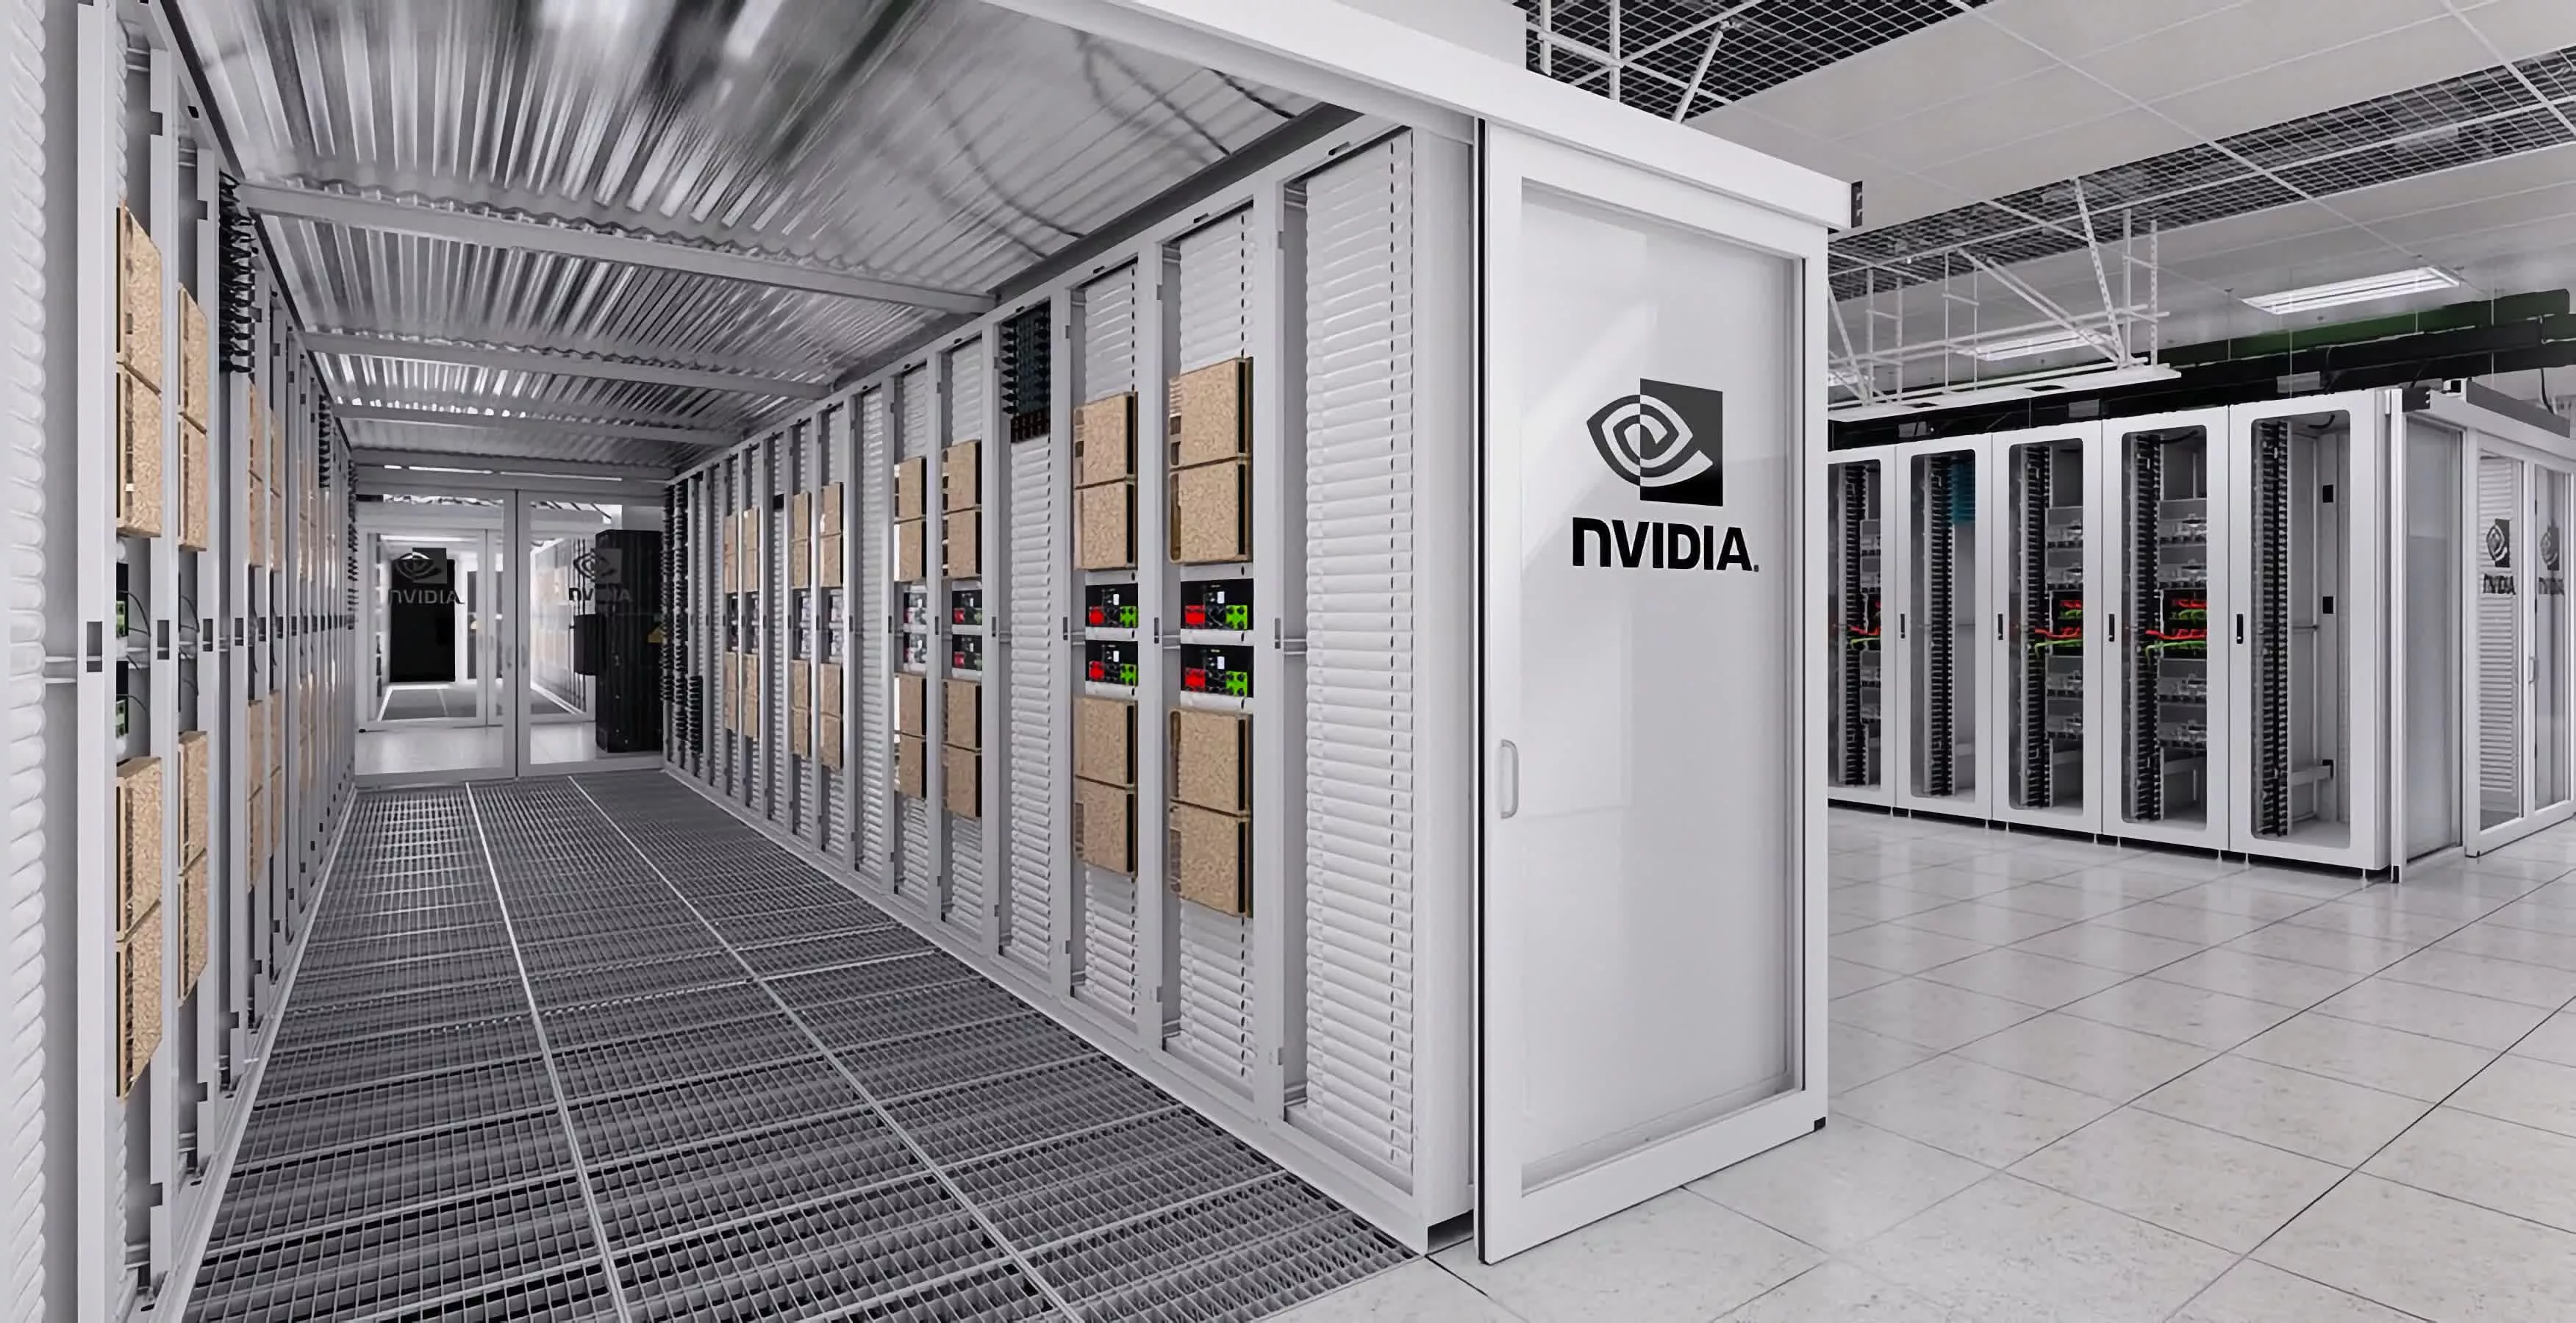 There's no going back: The new data center is dominated by Nvidia